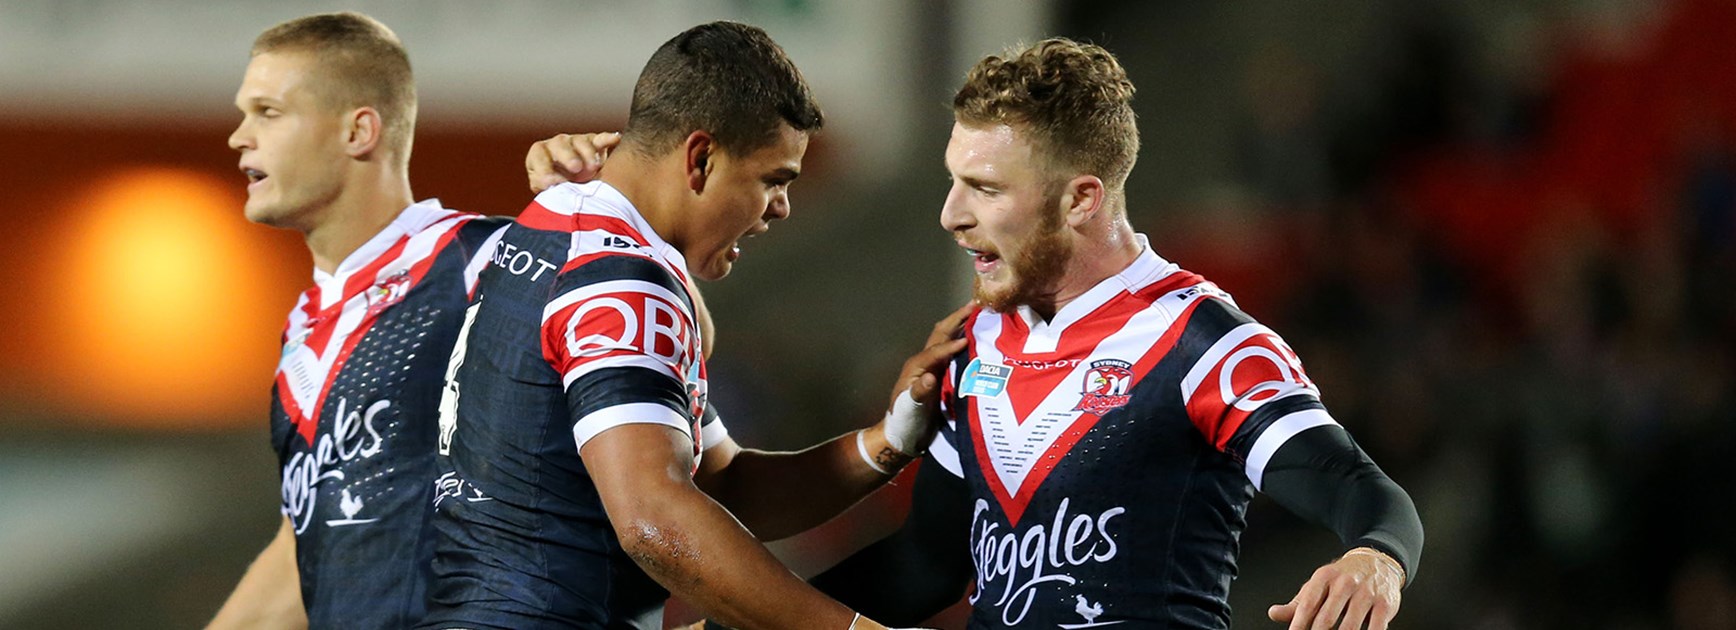 Roosters youngsters Latrell Mitchell and Jackson Hastings could be astute NRL Fantasy purchases in 2016.